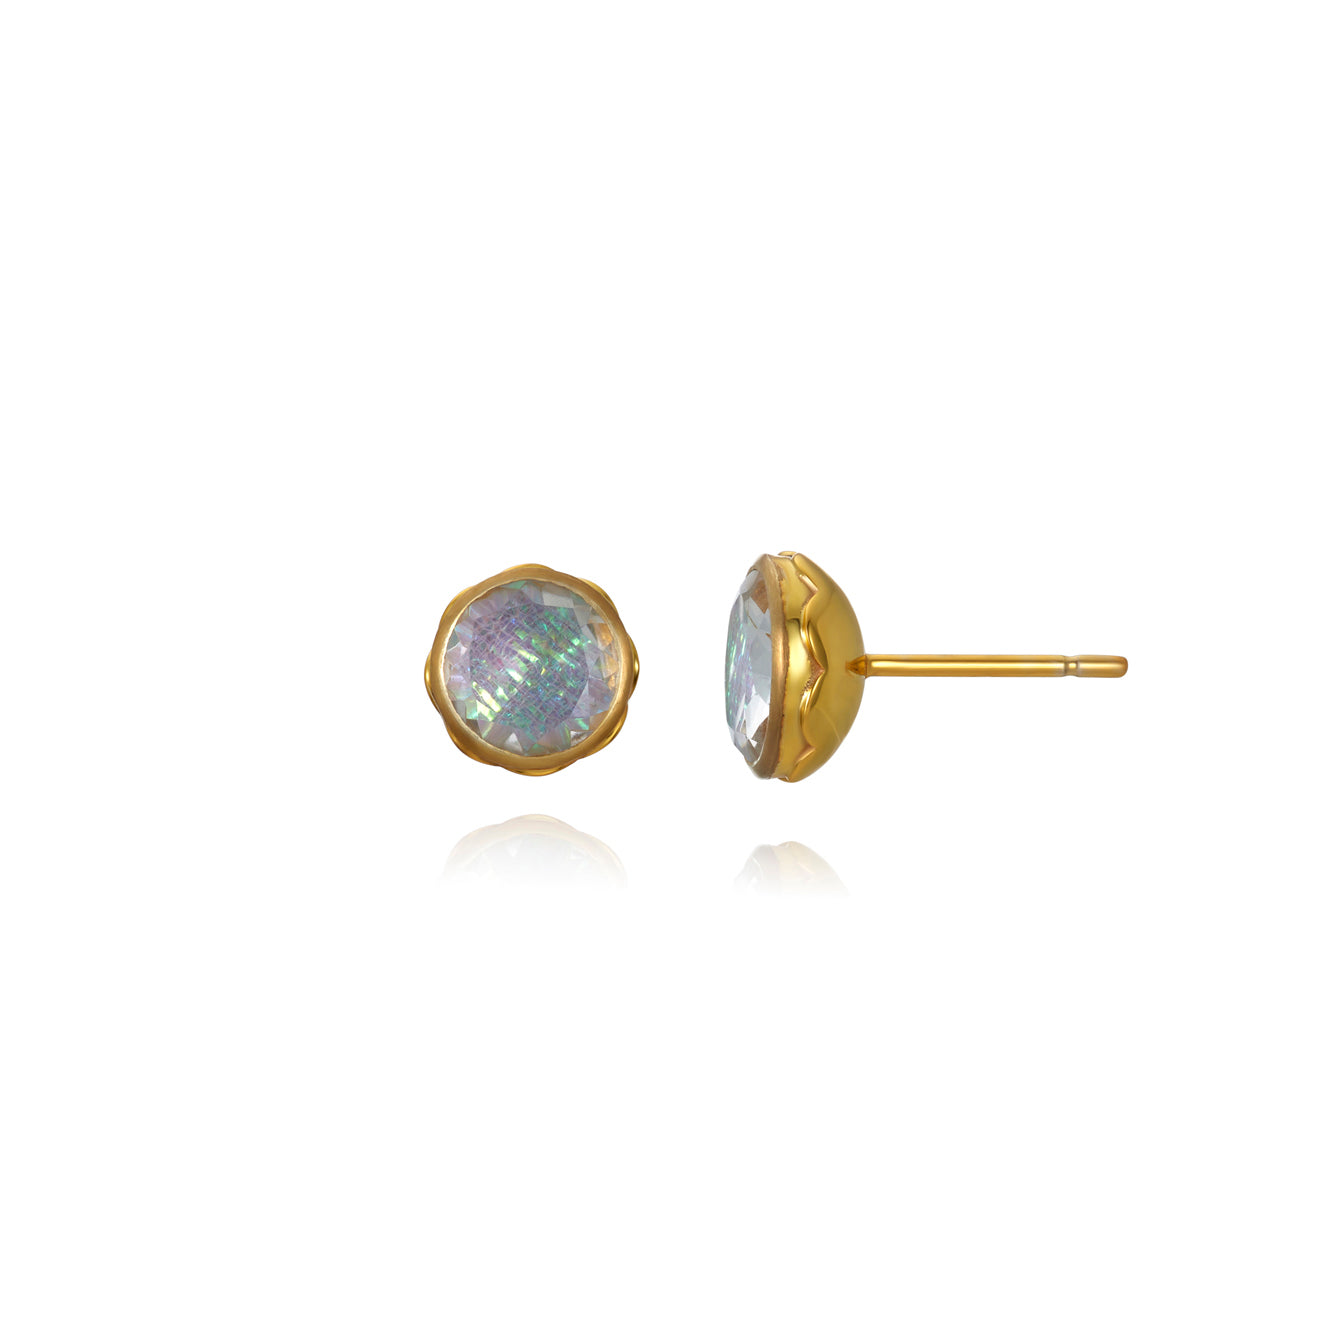 L&H Bride Round Stud Earrings in Bliss (White Rhodium or Yellow Gold Wash)